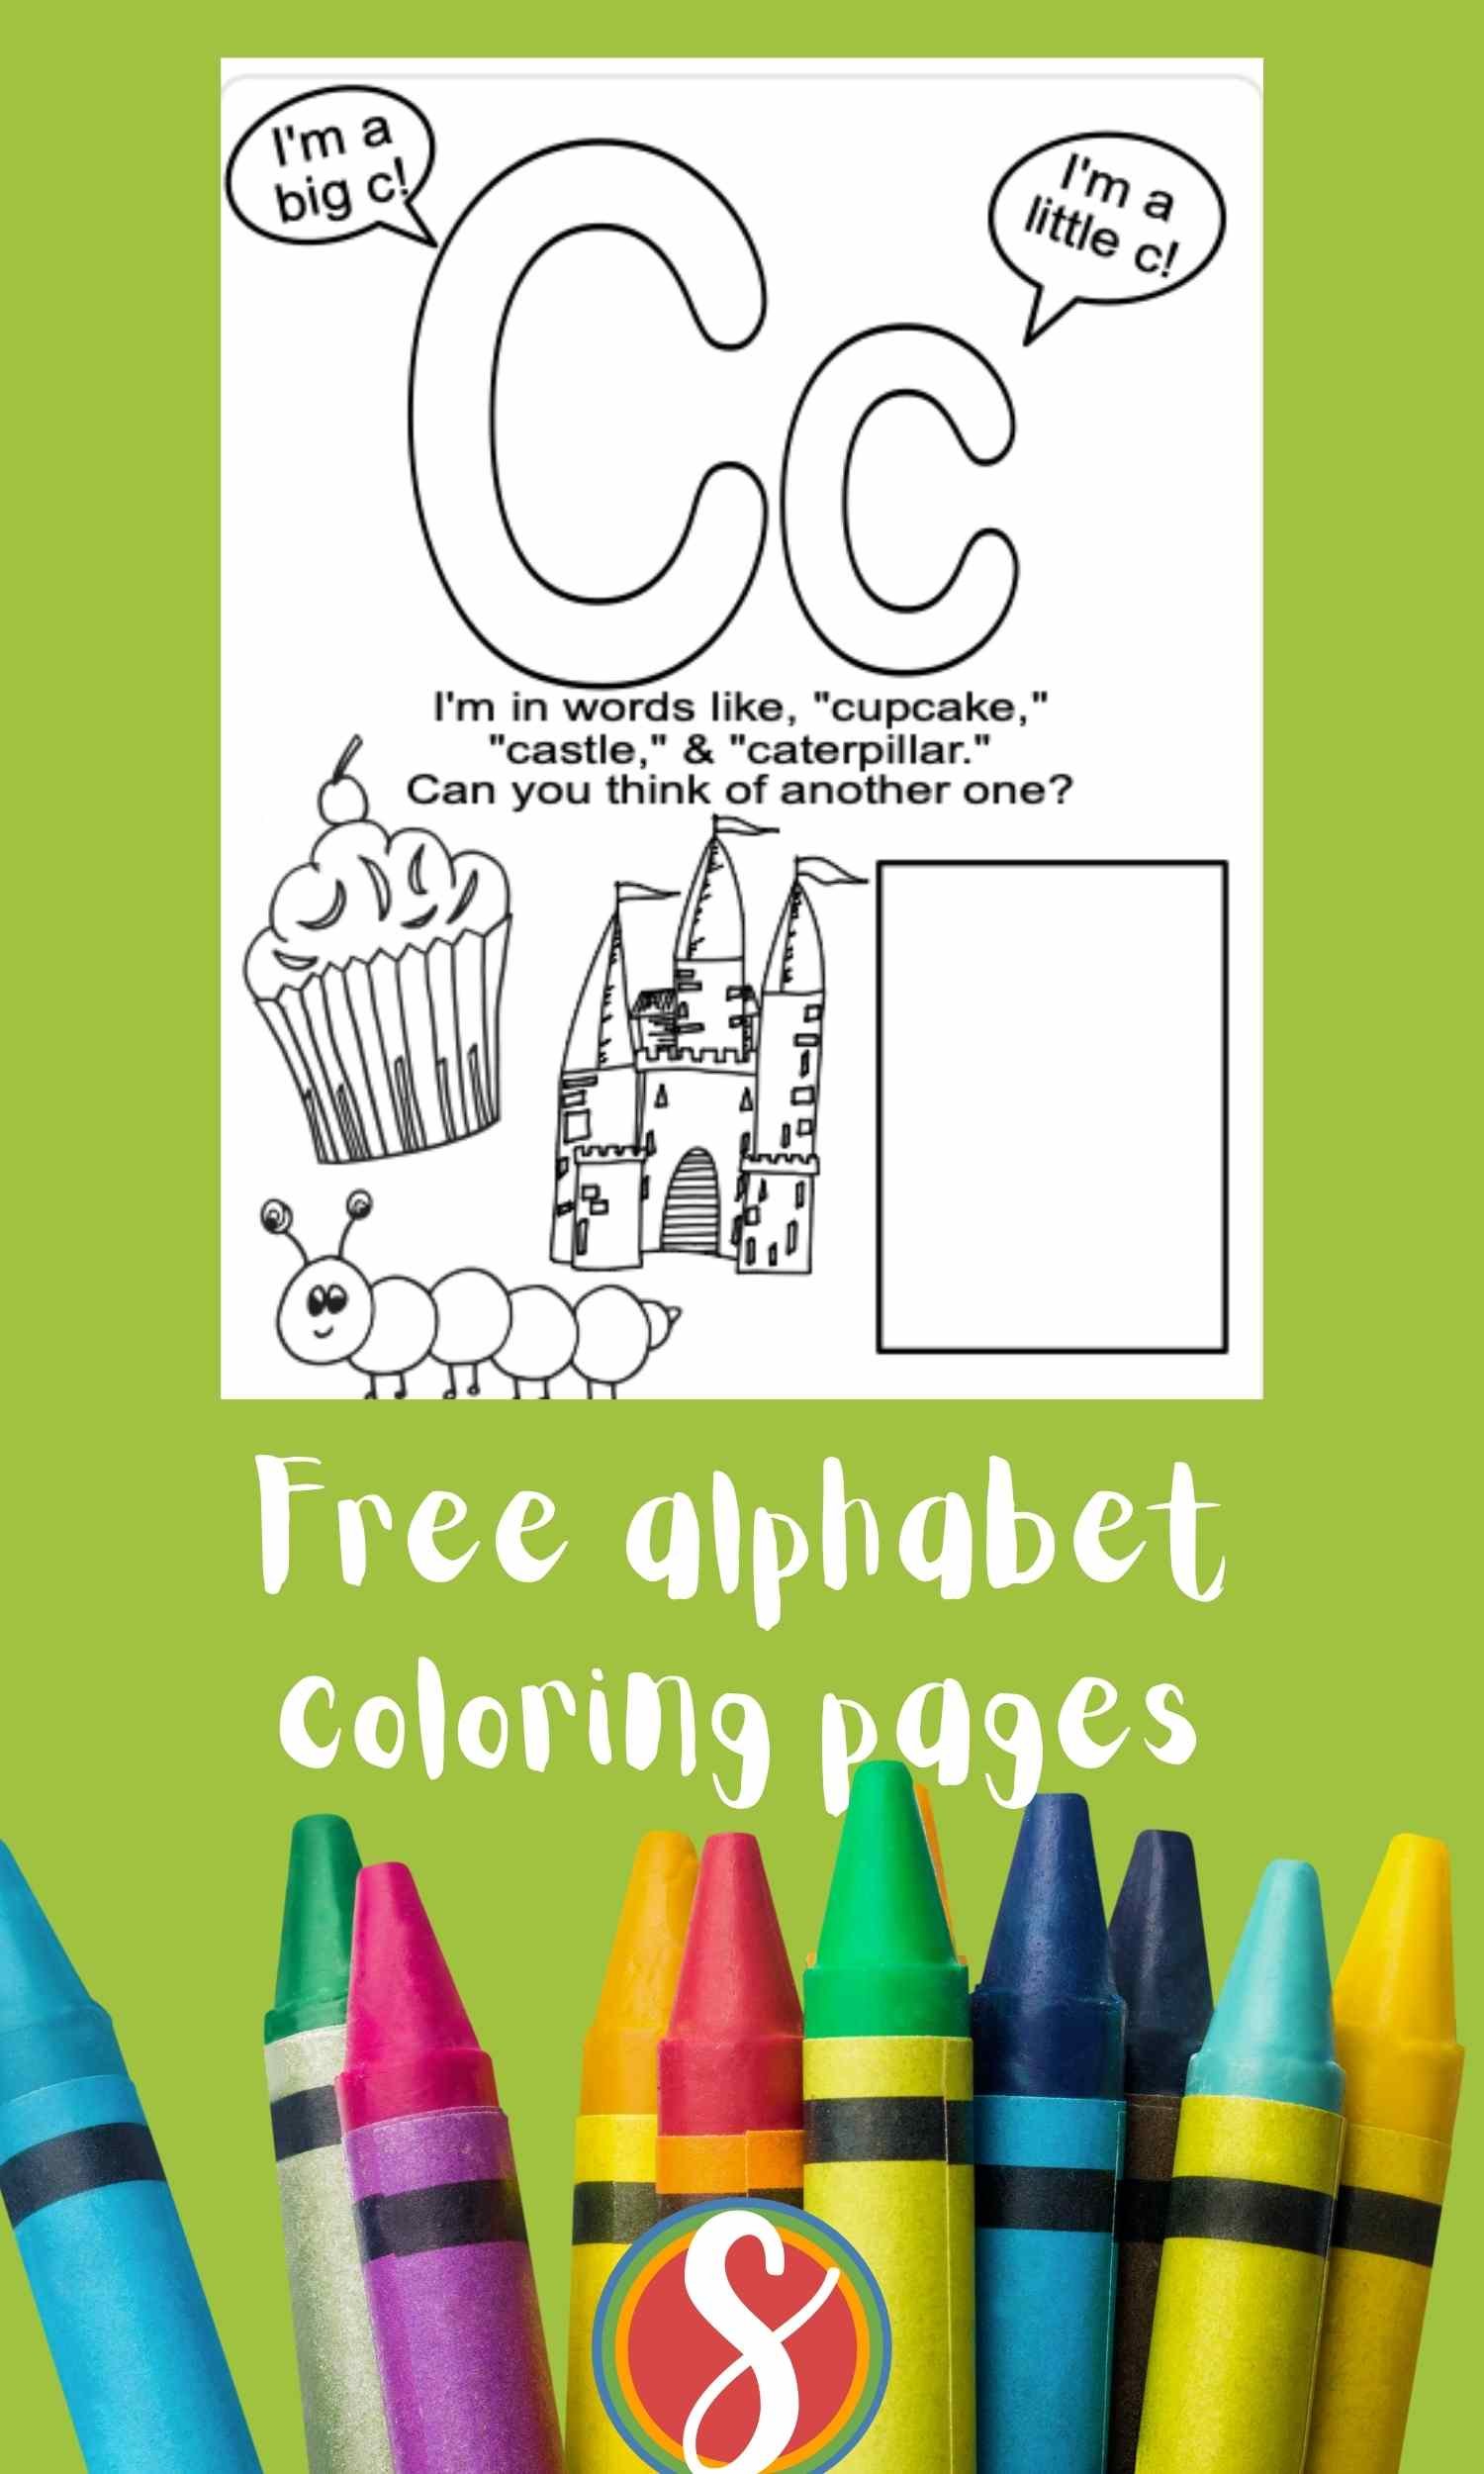 2 bubble letter c's, one big, one small, a castle a cupcake and a caterpillar to color, an empty box to draw your own c object